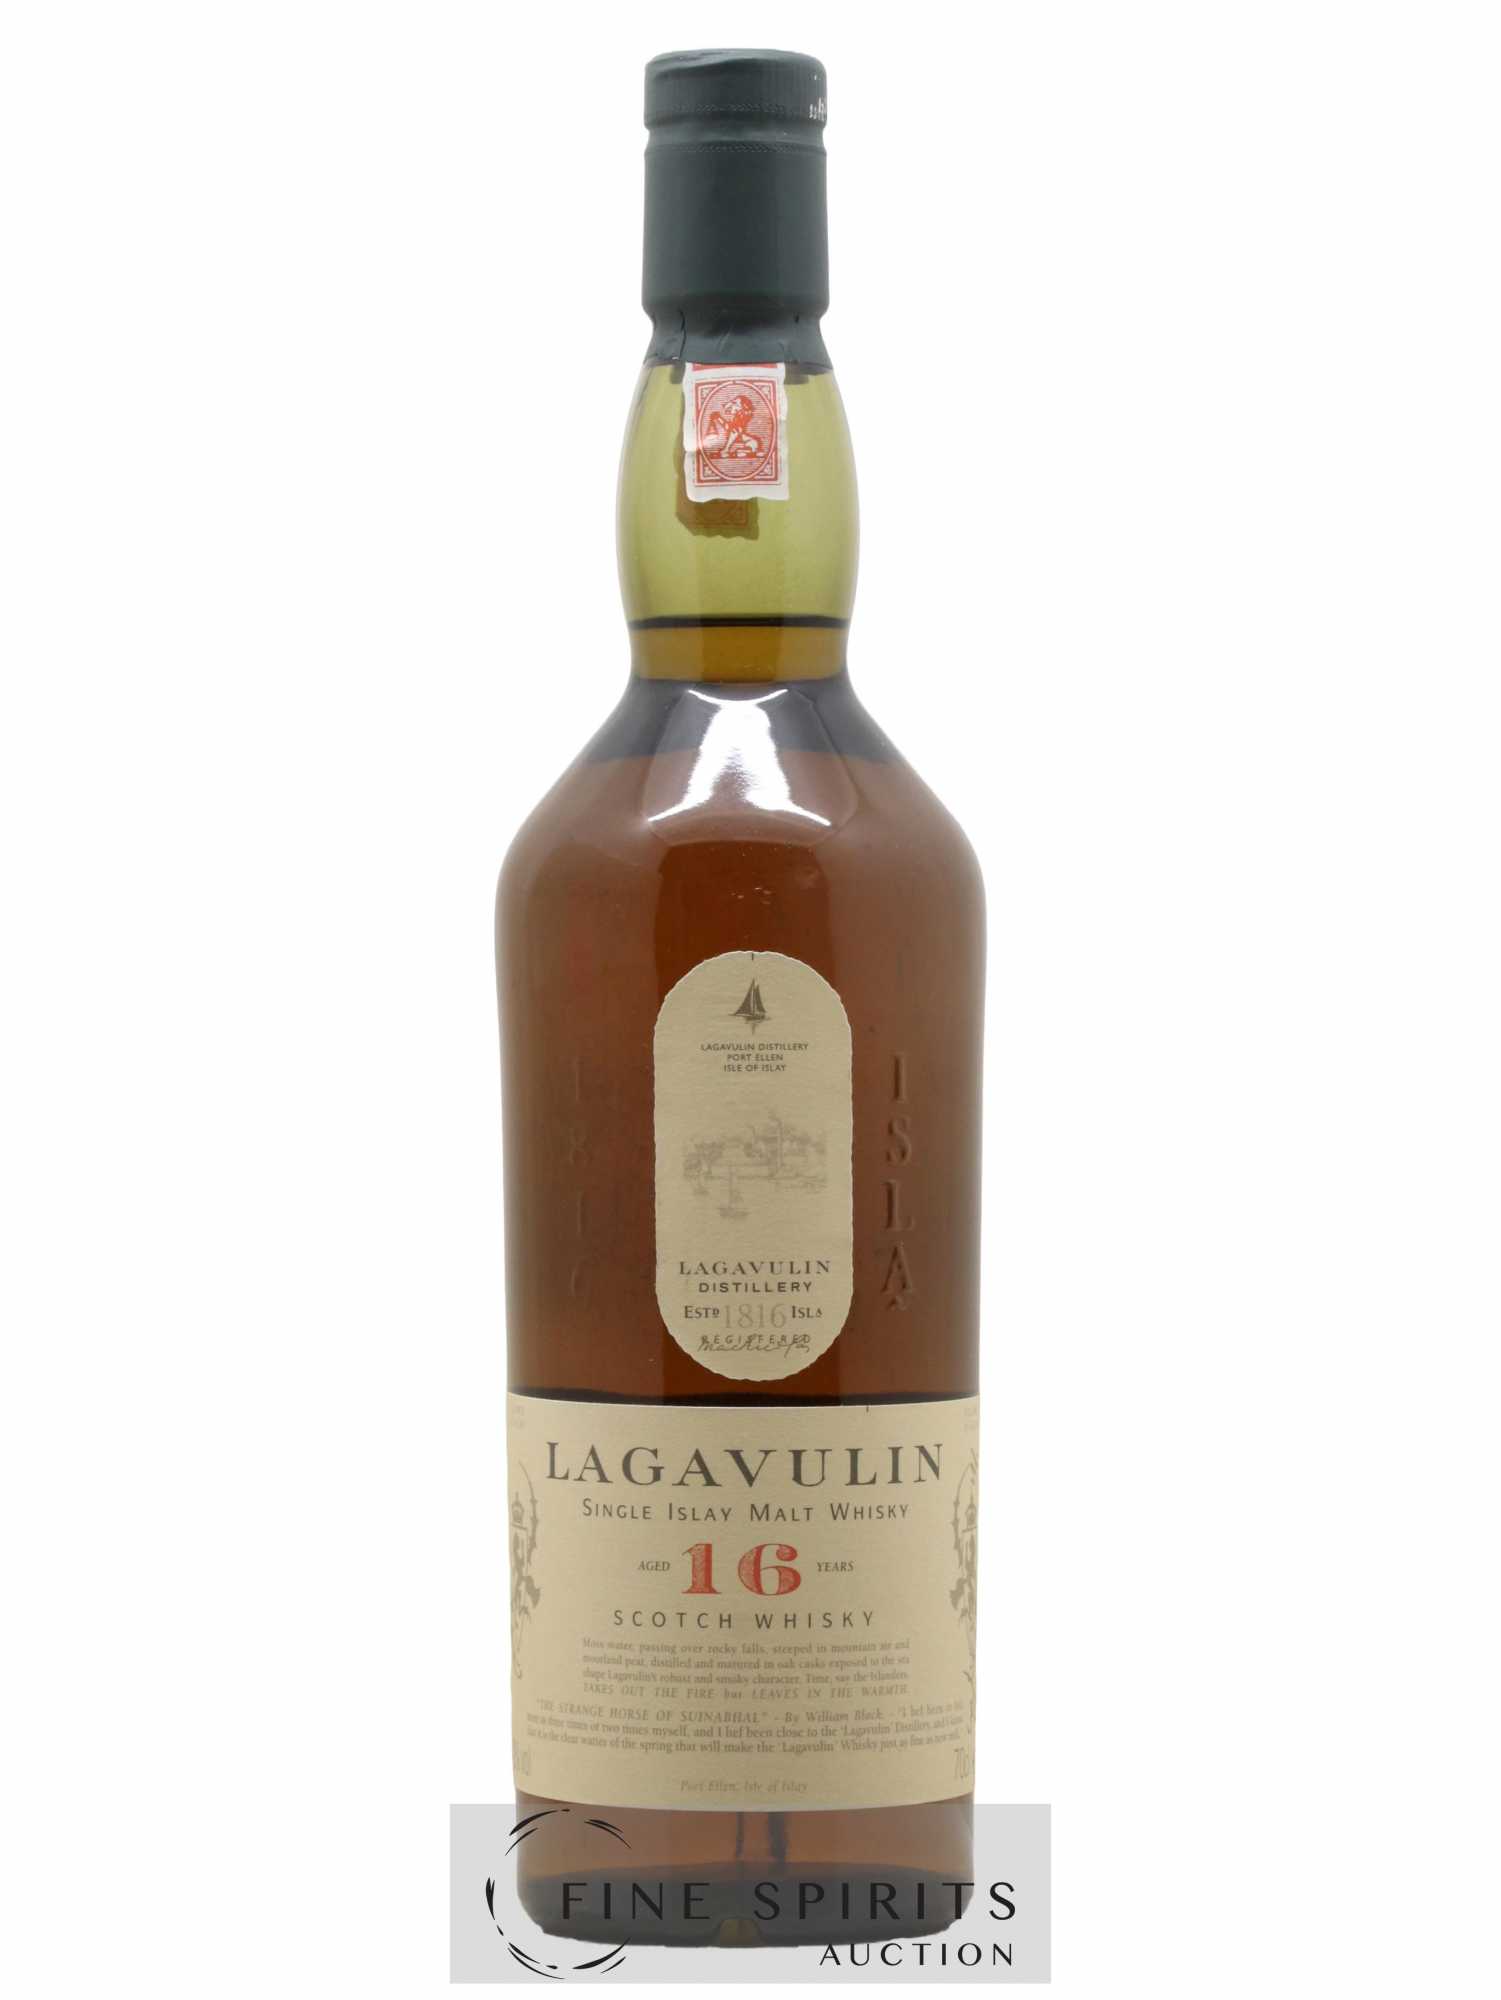 Lagavulin 16 Year Old Whisky 70cl